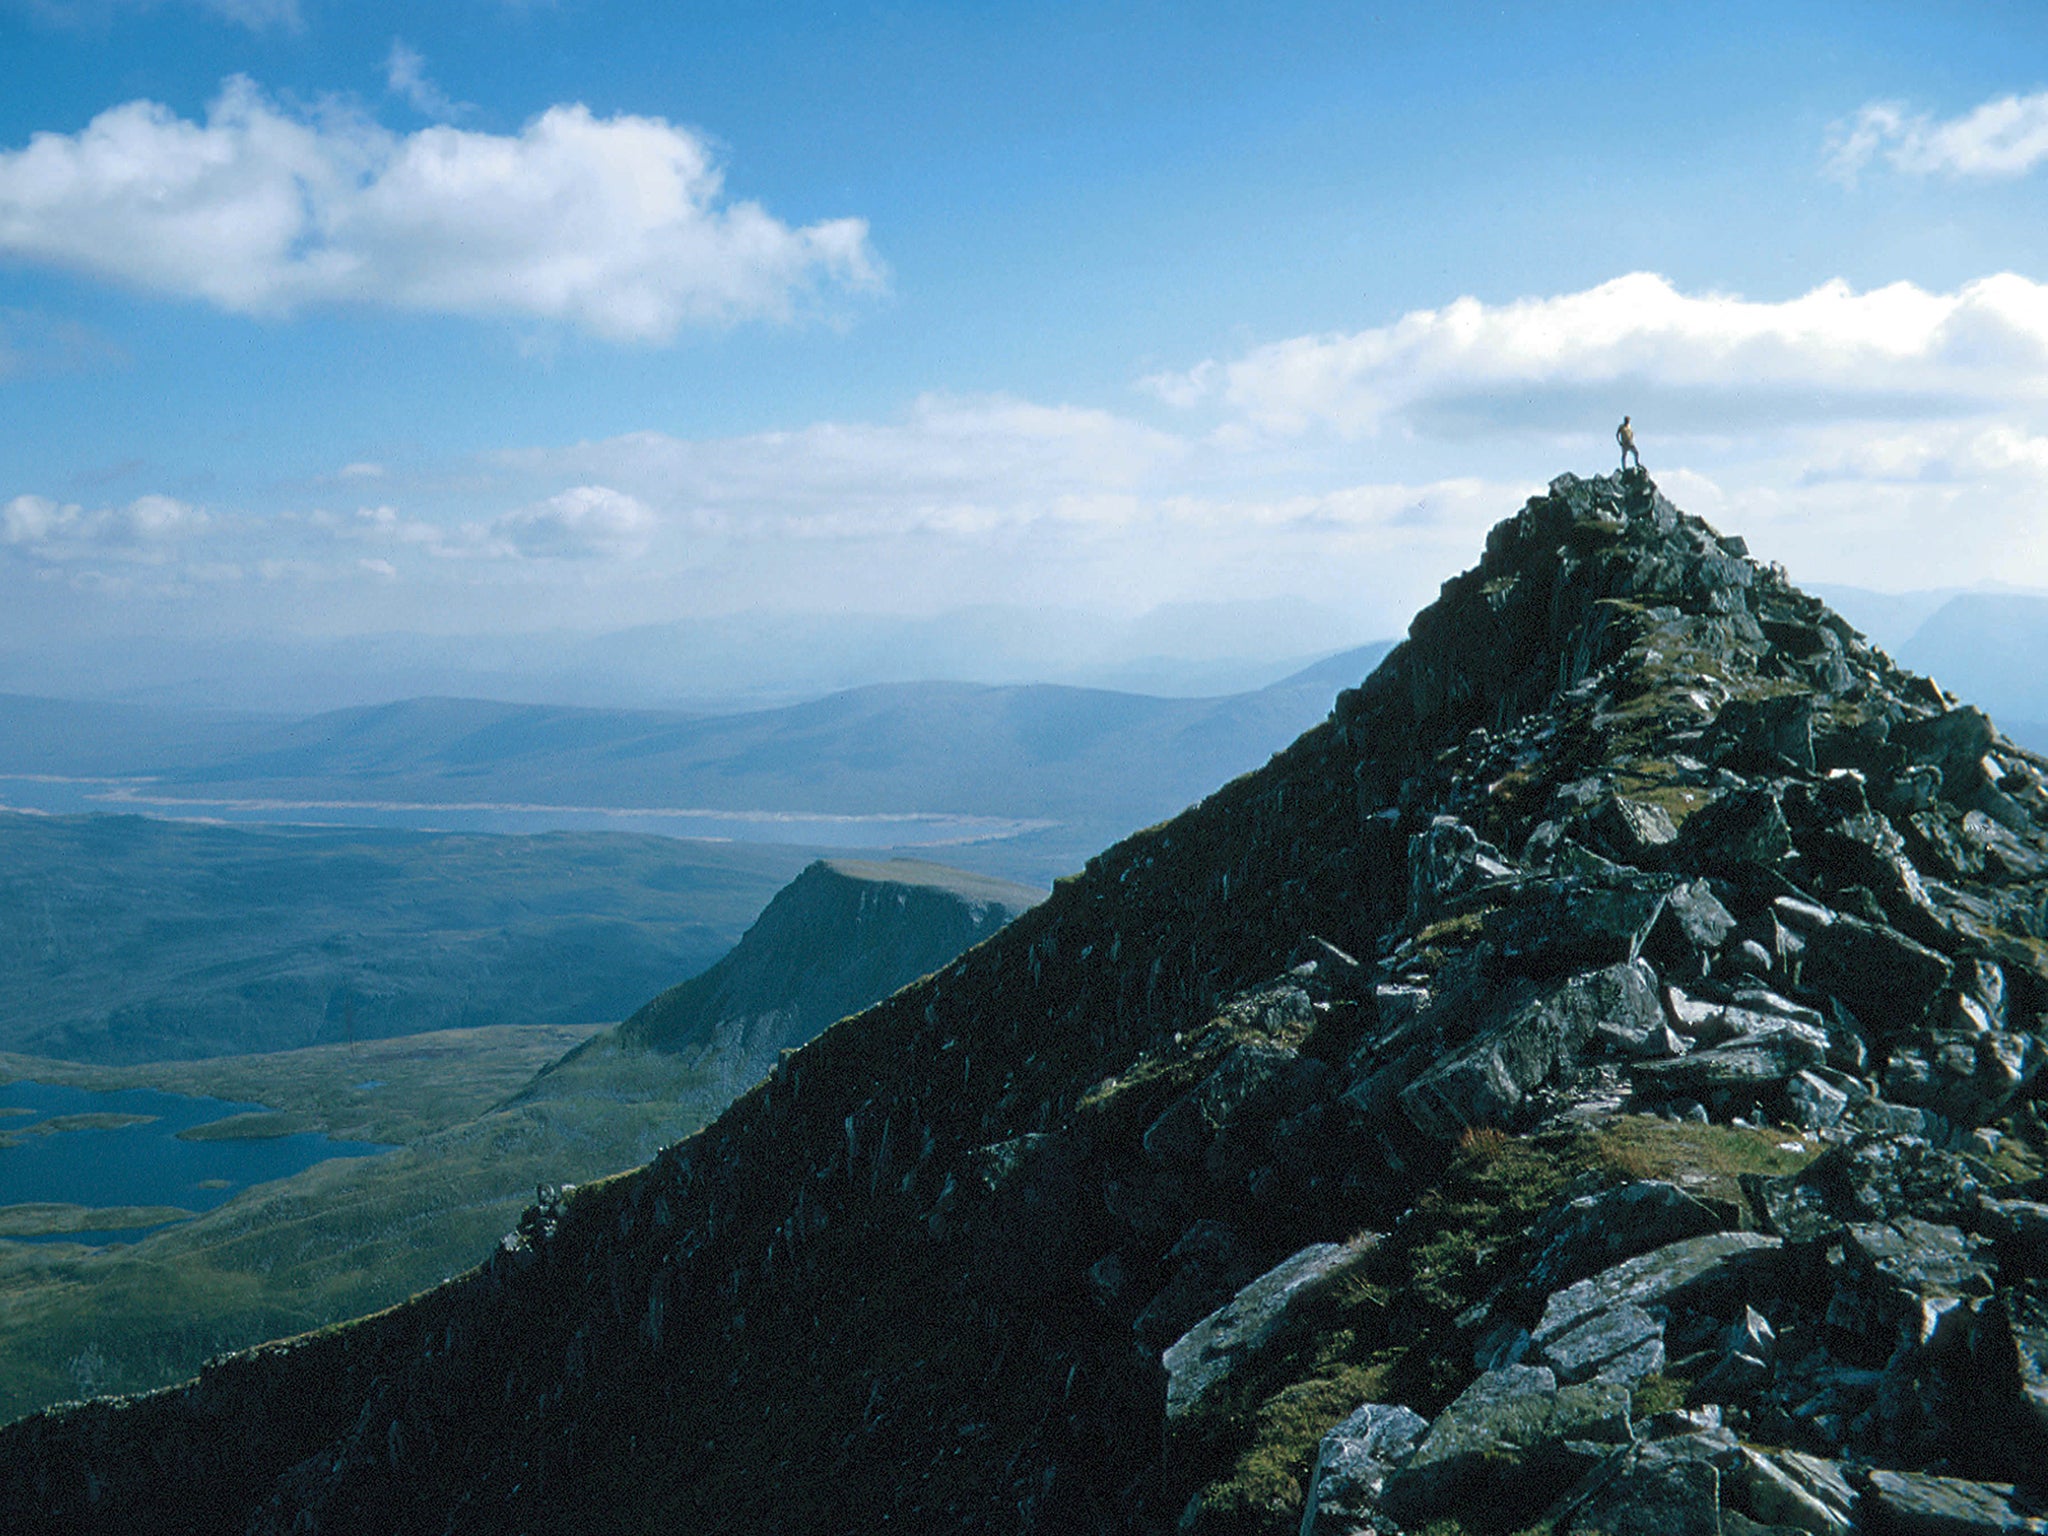 Ben Nevis is the UK's highest mountain at 1,345m tall